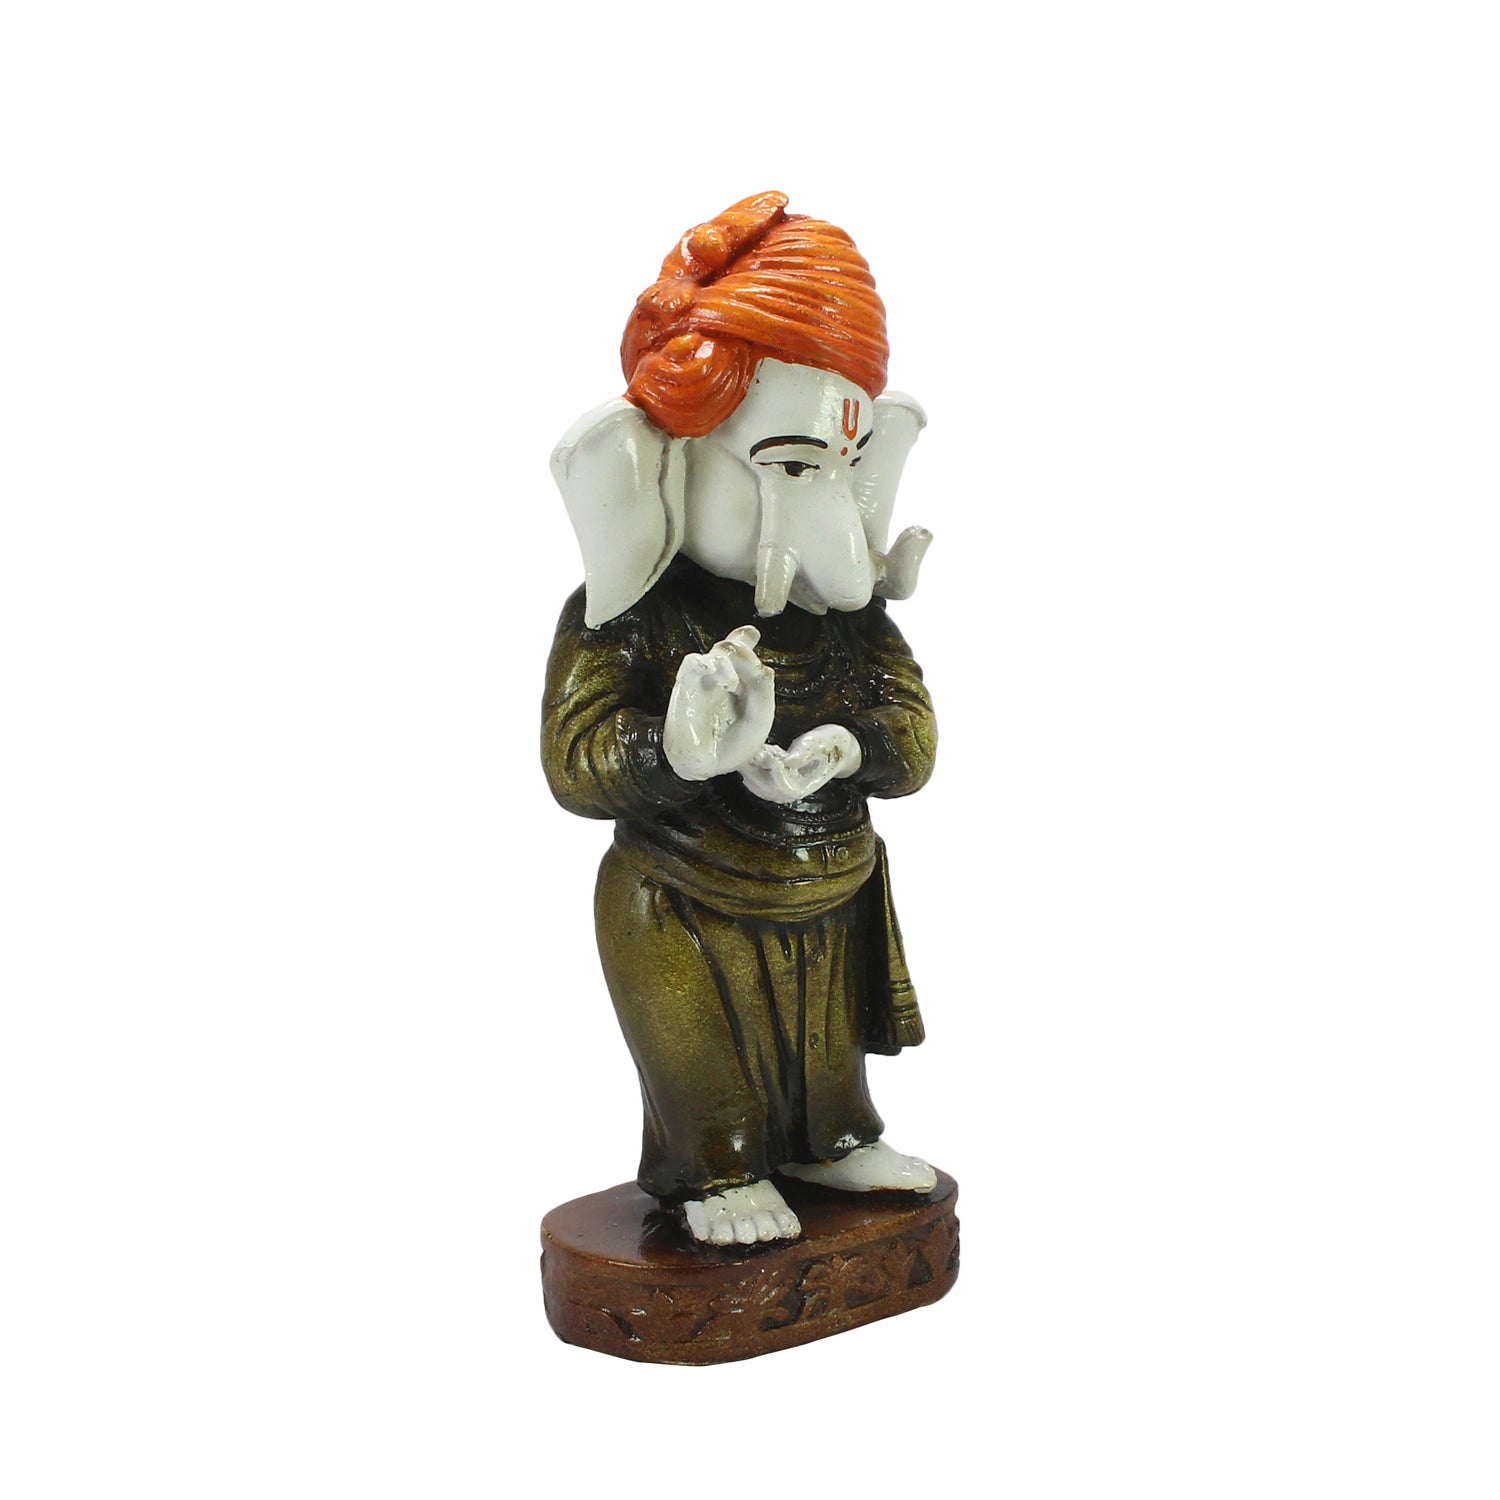 Standing Blessing Lord Ganesha Statue Decorative Showpiece 3